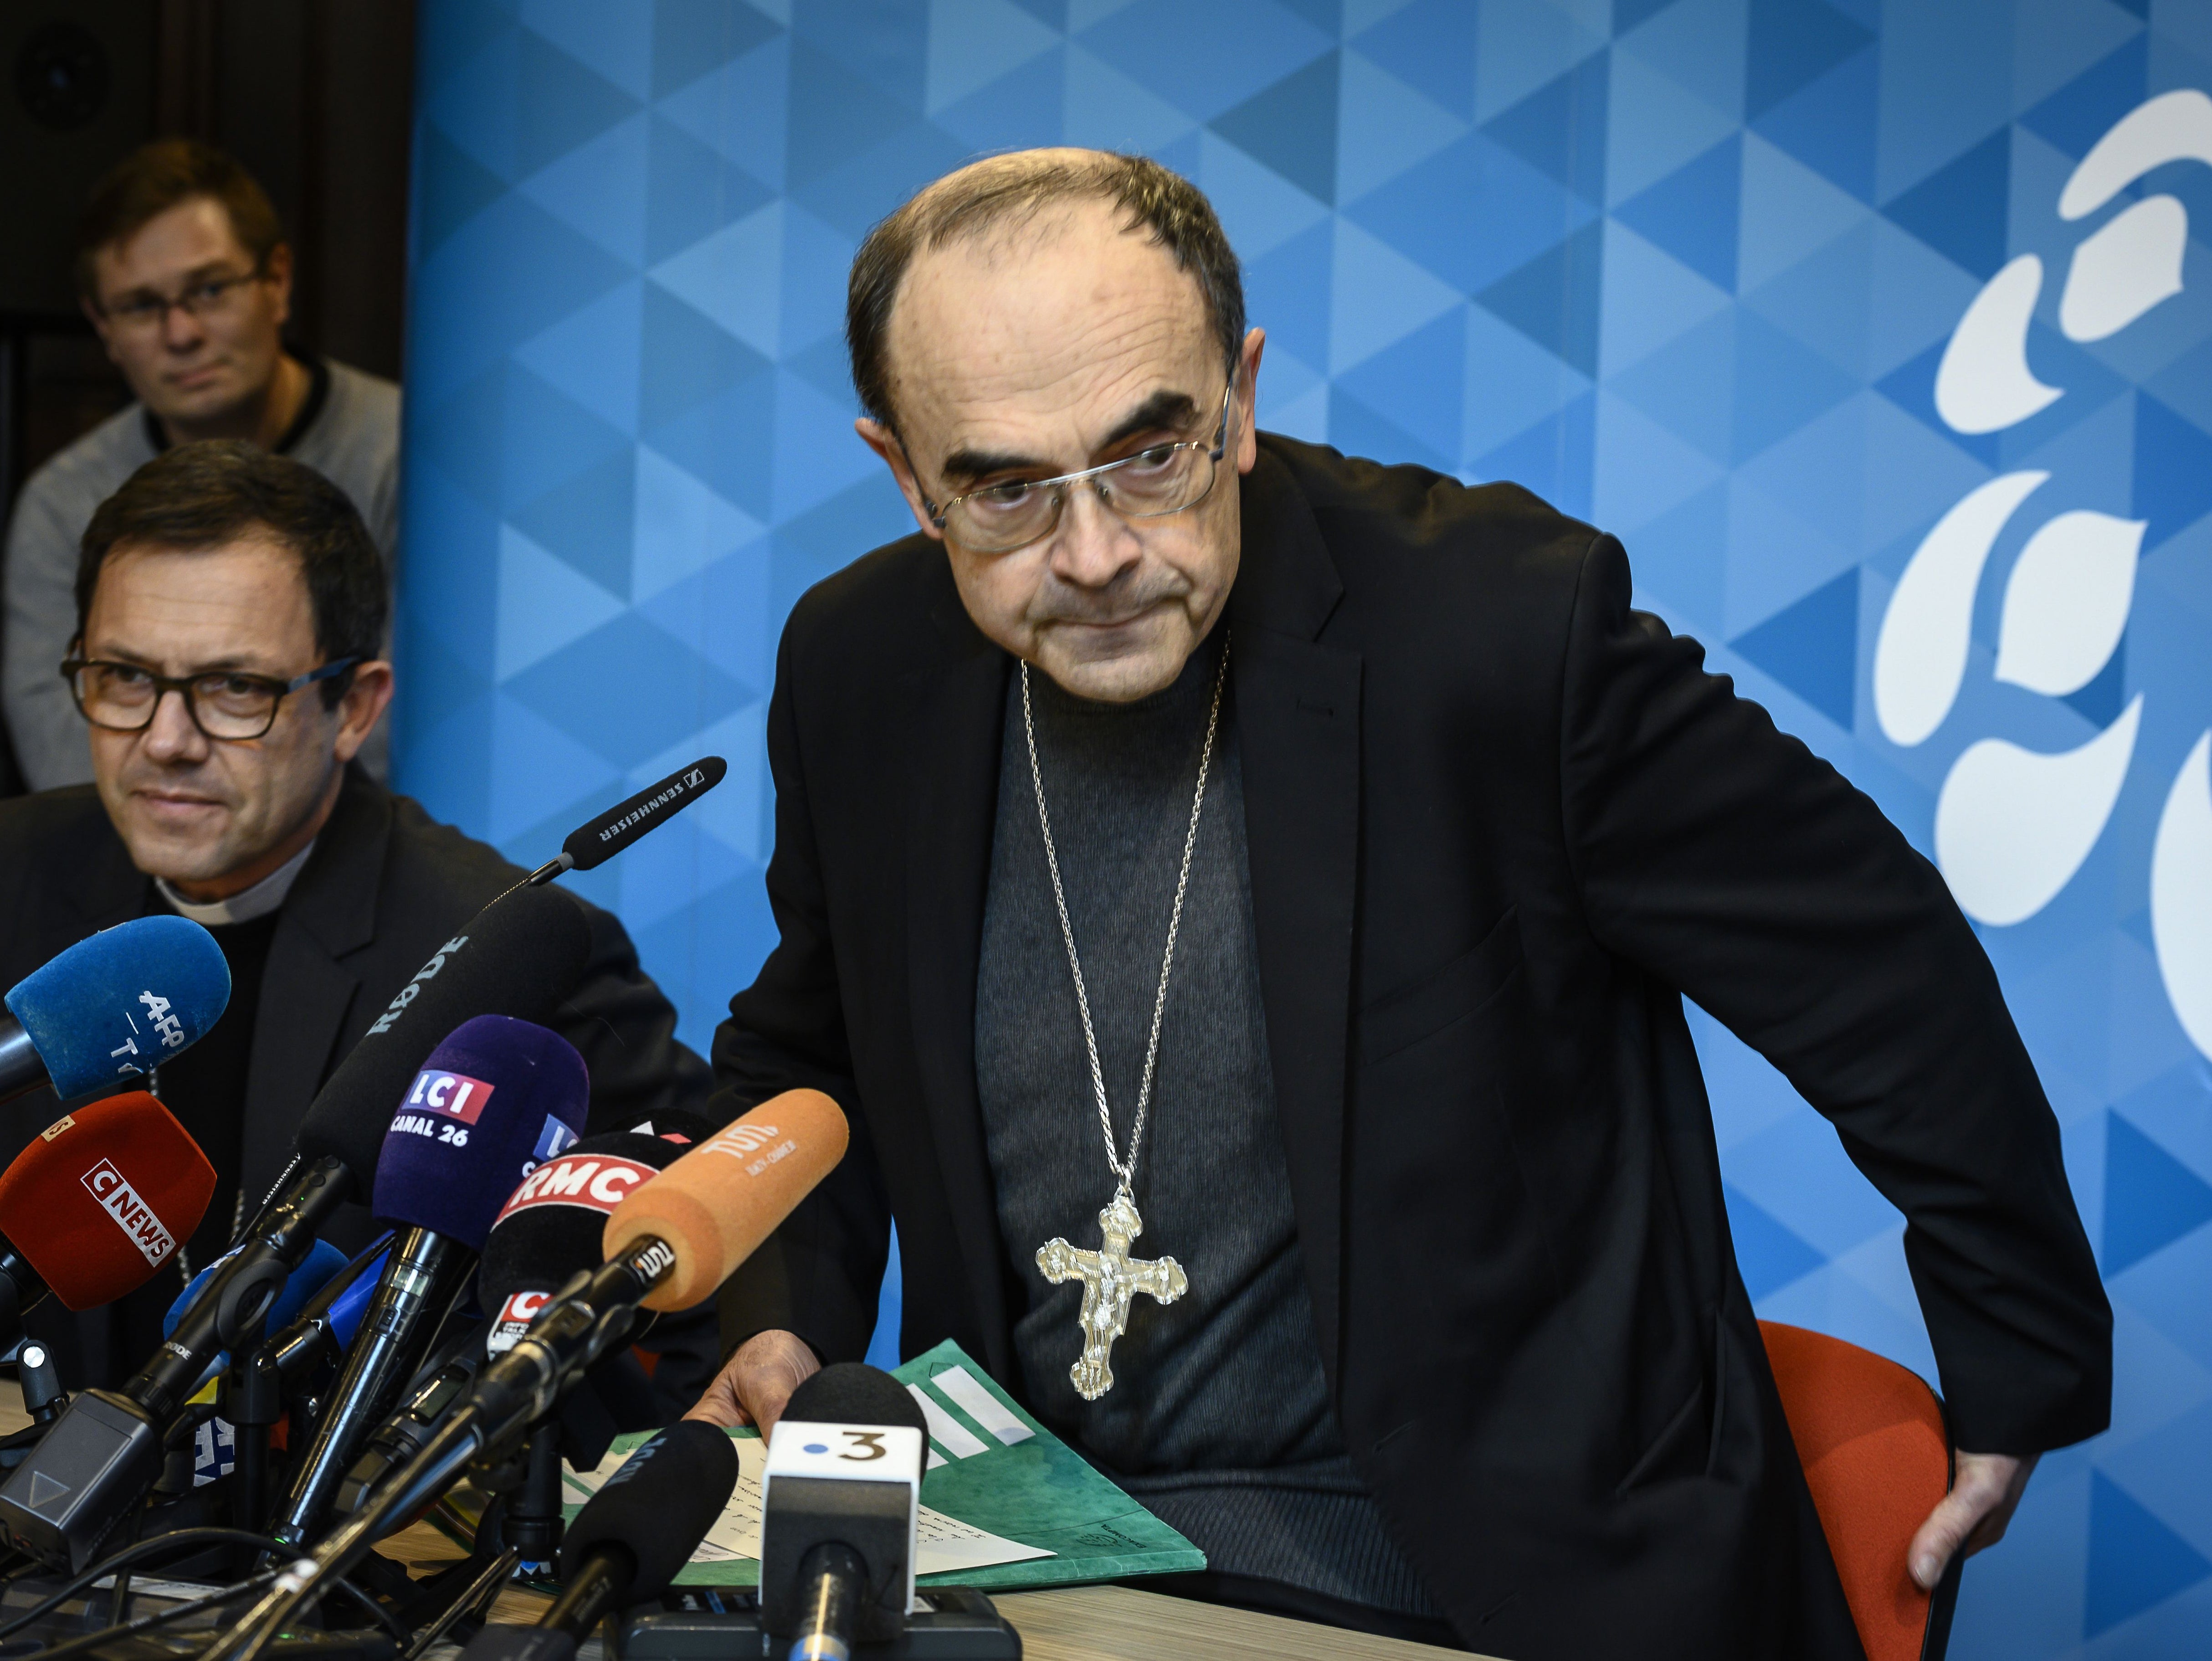 France’s top cleric, Cardinal Philippe Barbarin, was found guilty of failing to report past acts of sex abuse by a priest, but had his conviction overturned after offering to quit